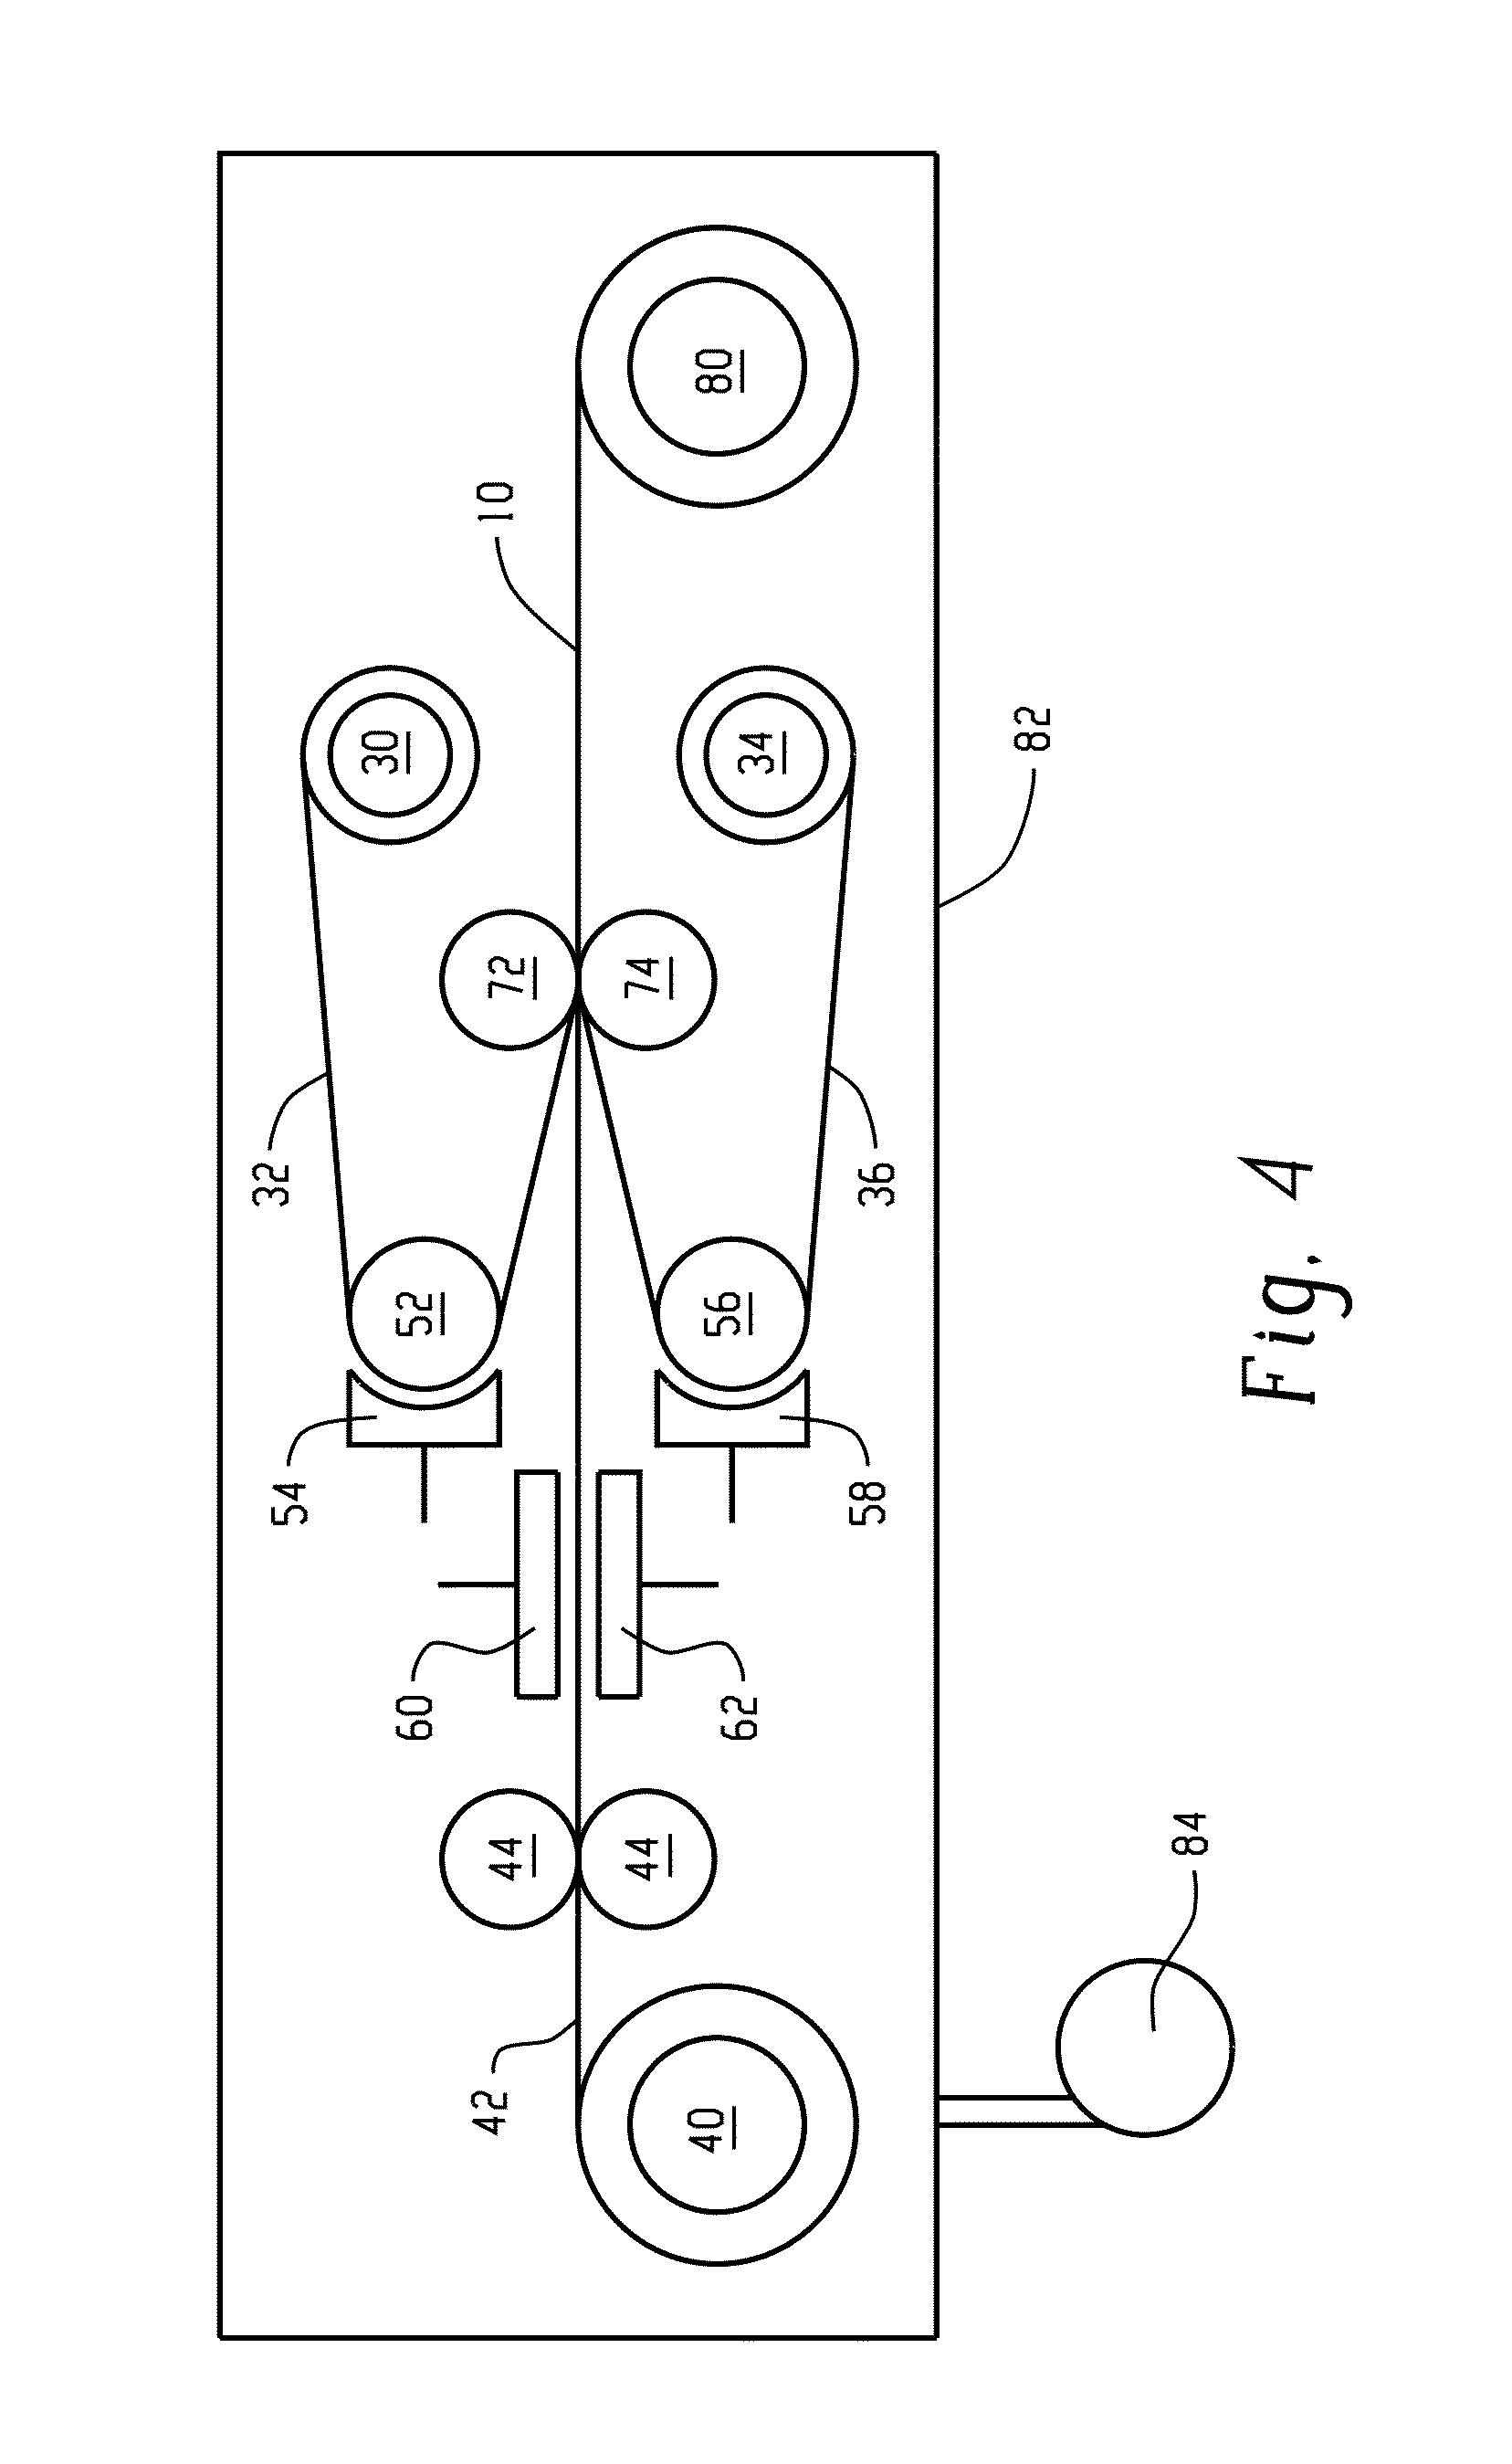 Metal laminate with metallurgical bonds and reduced density metal core layer and method for making the same